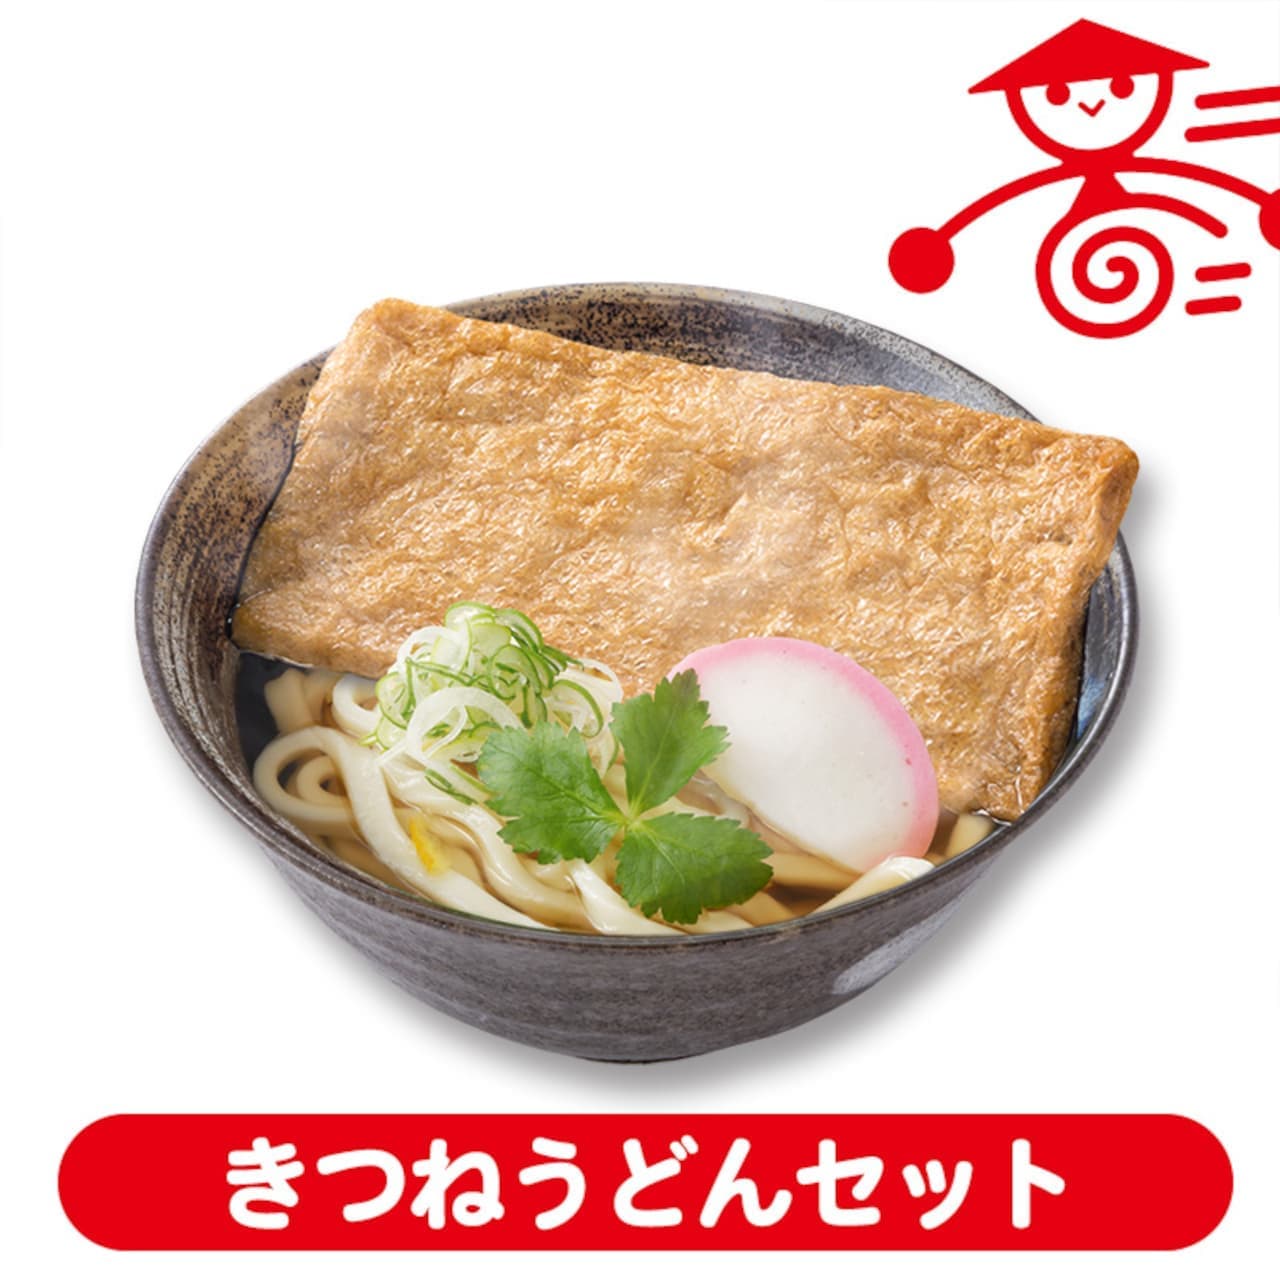  "Yamada Udon's Shortcut Meal" is now available through official mail order.